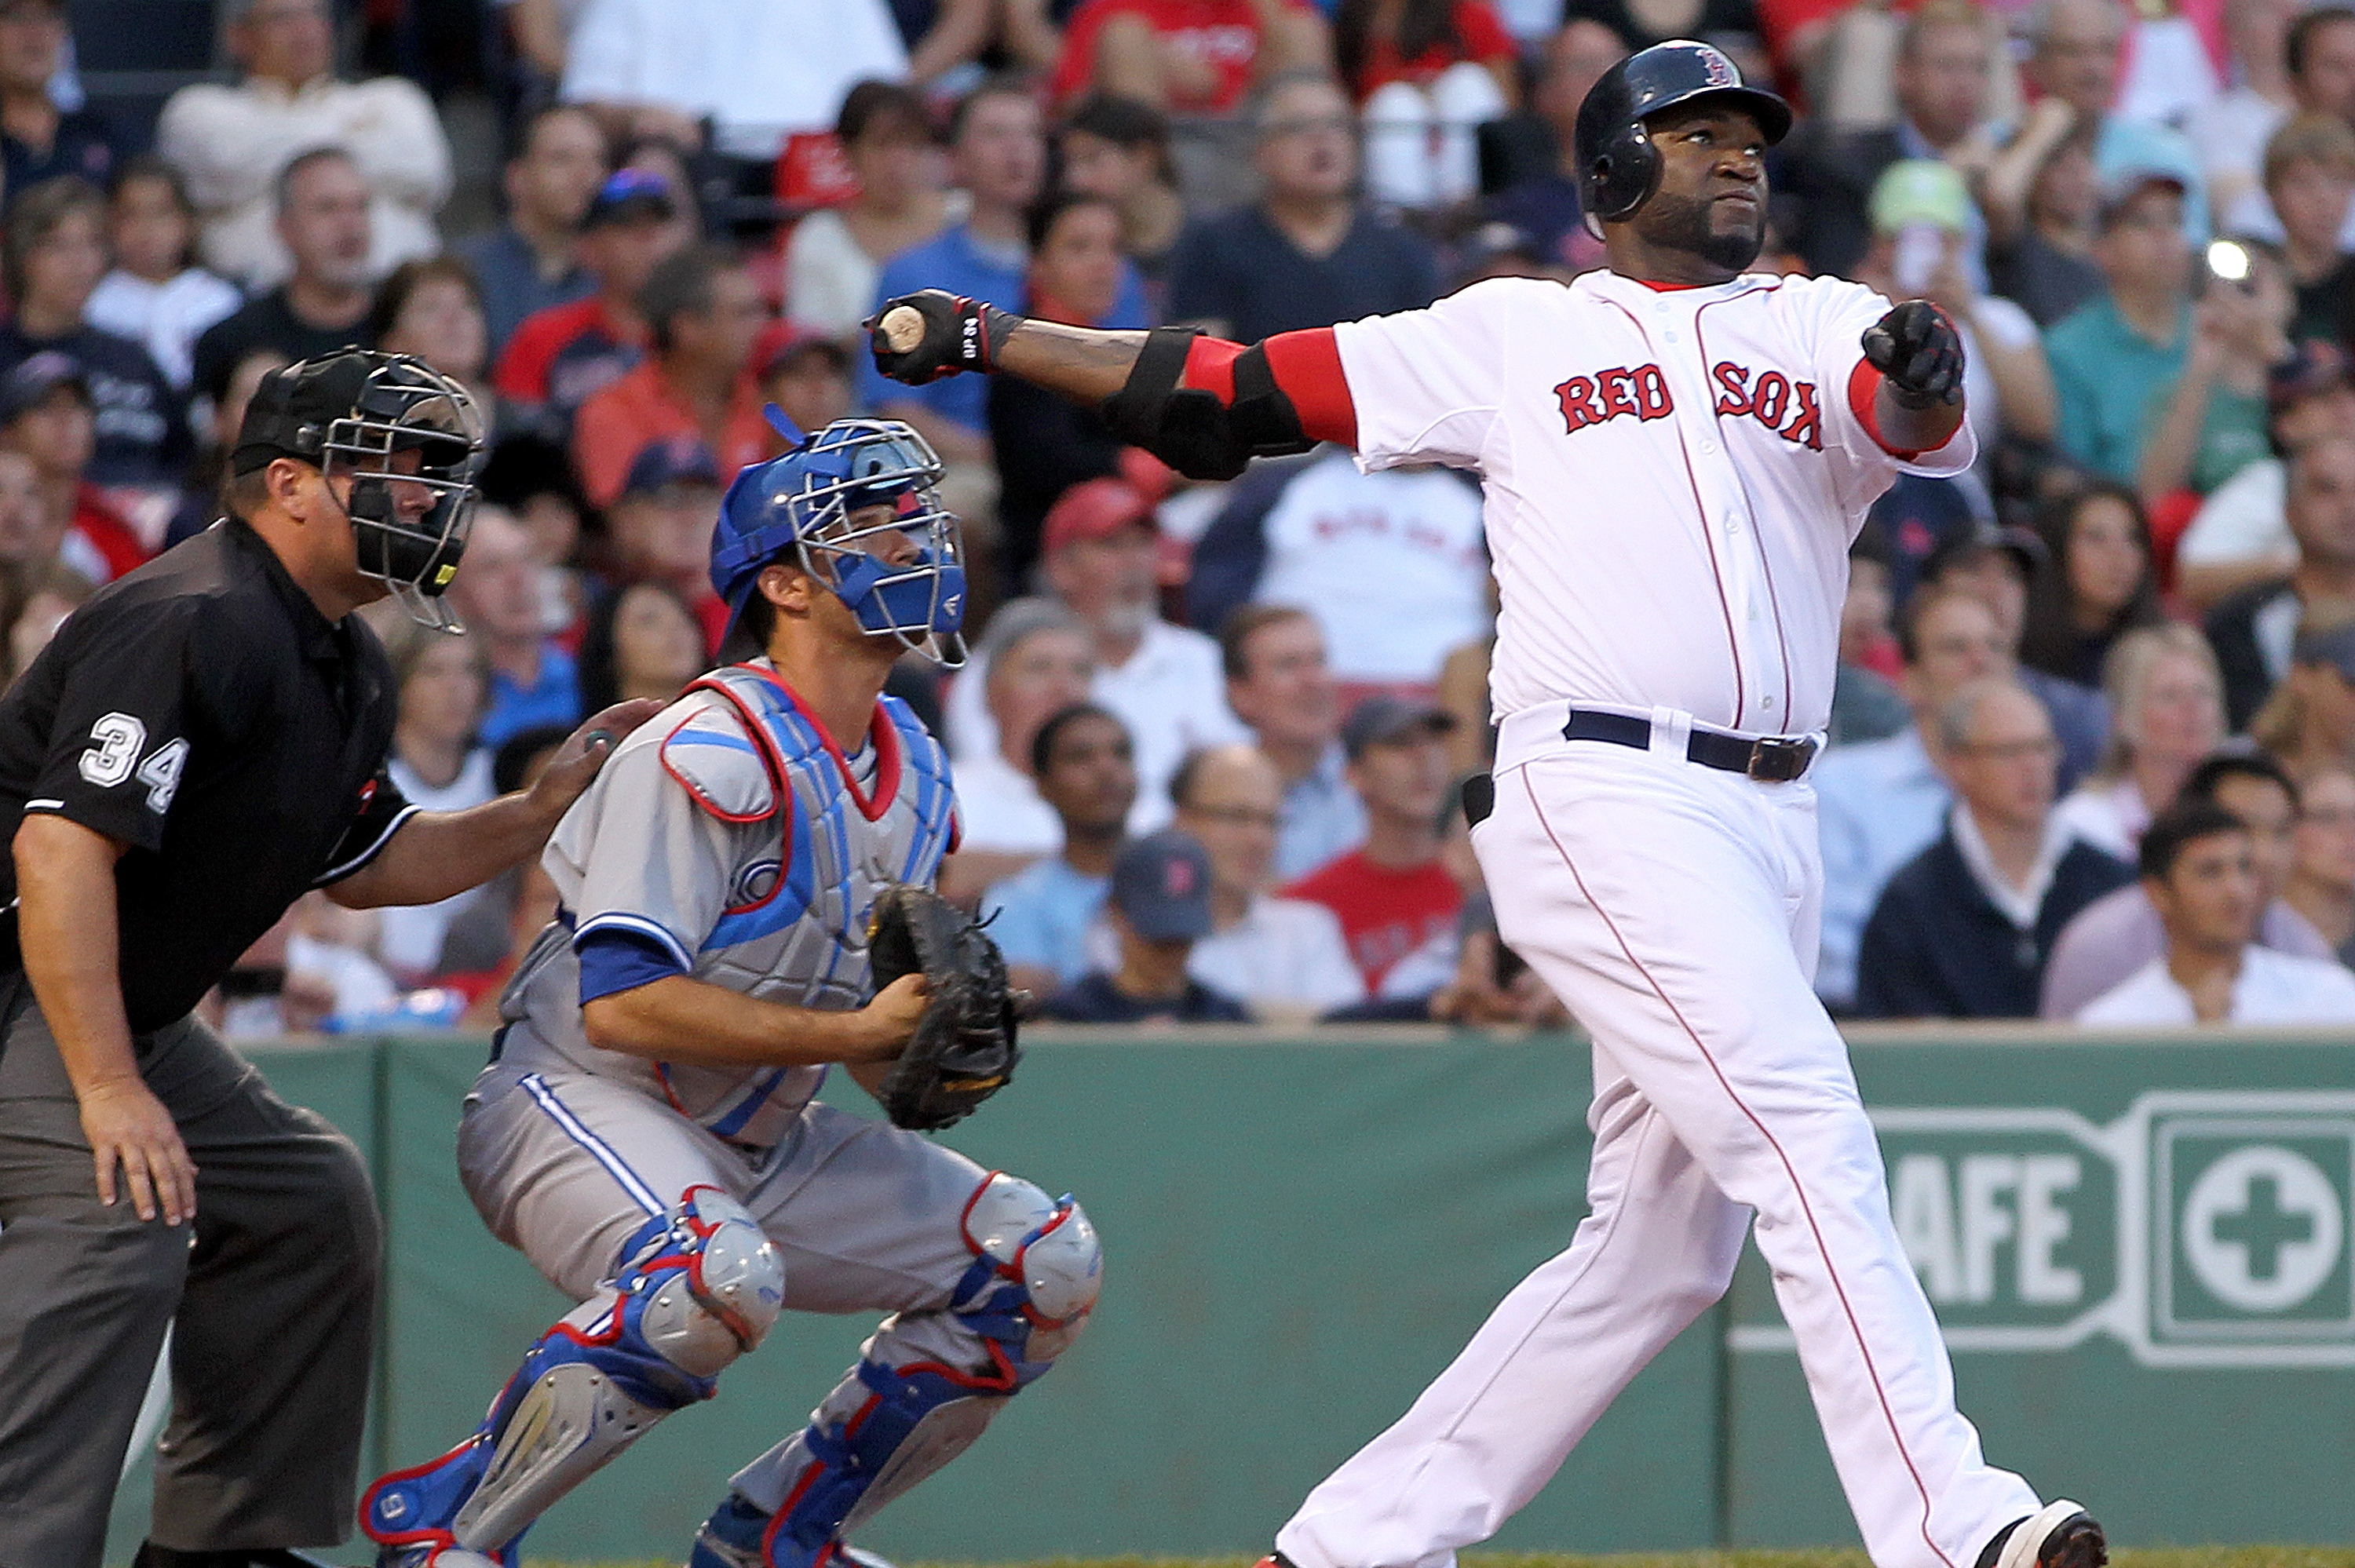 David Ortiz hits 509th homer to power Red Sox past White Sox